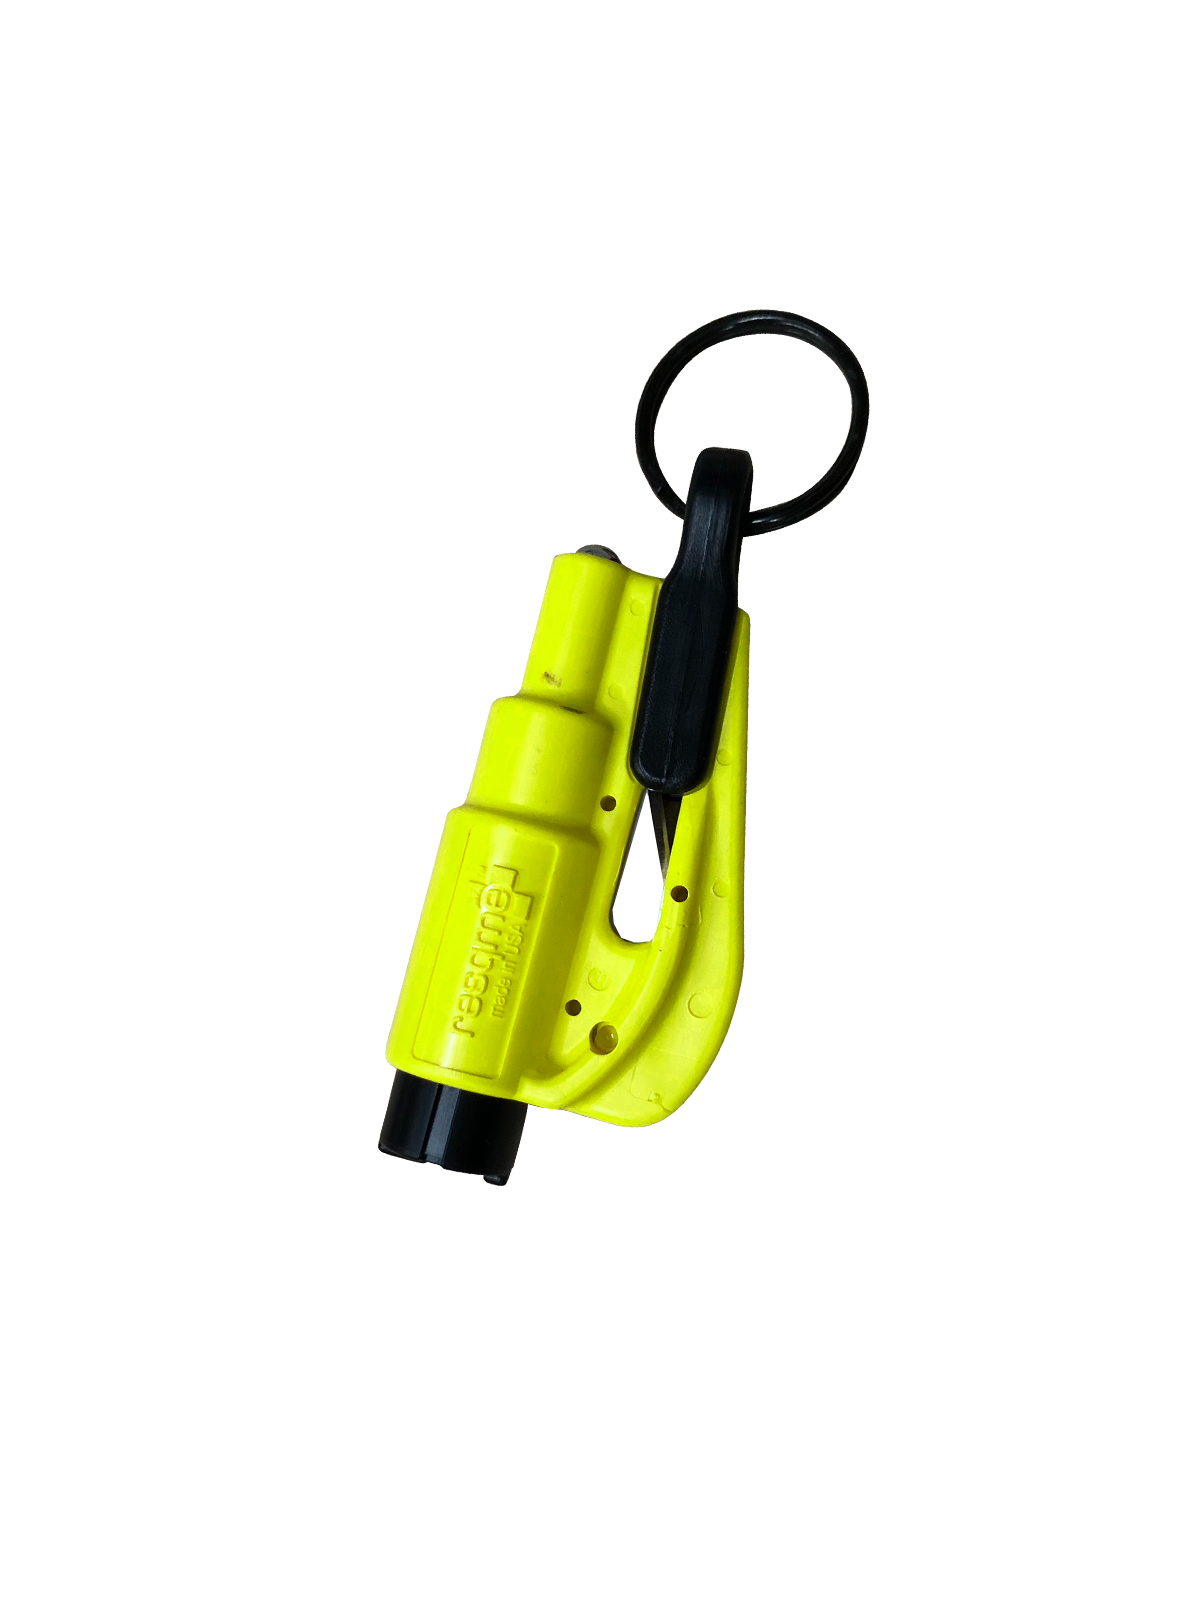 ResQme Rescue and Escape Tool with Glass Breaker and Seat Belt